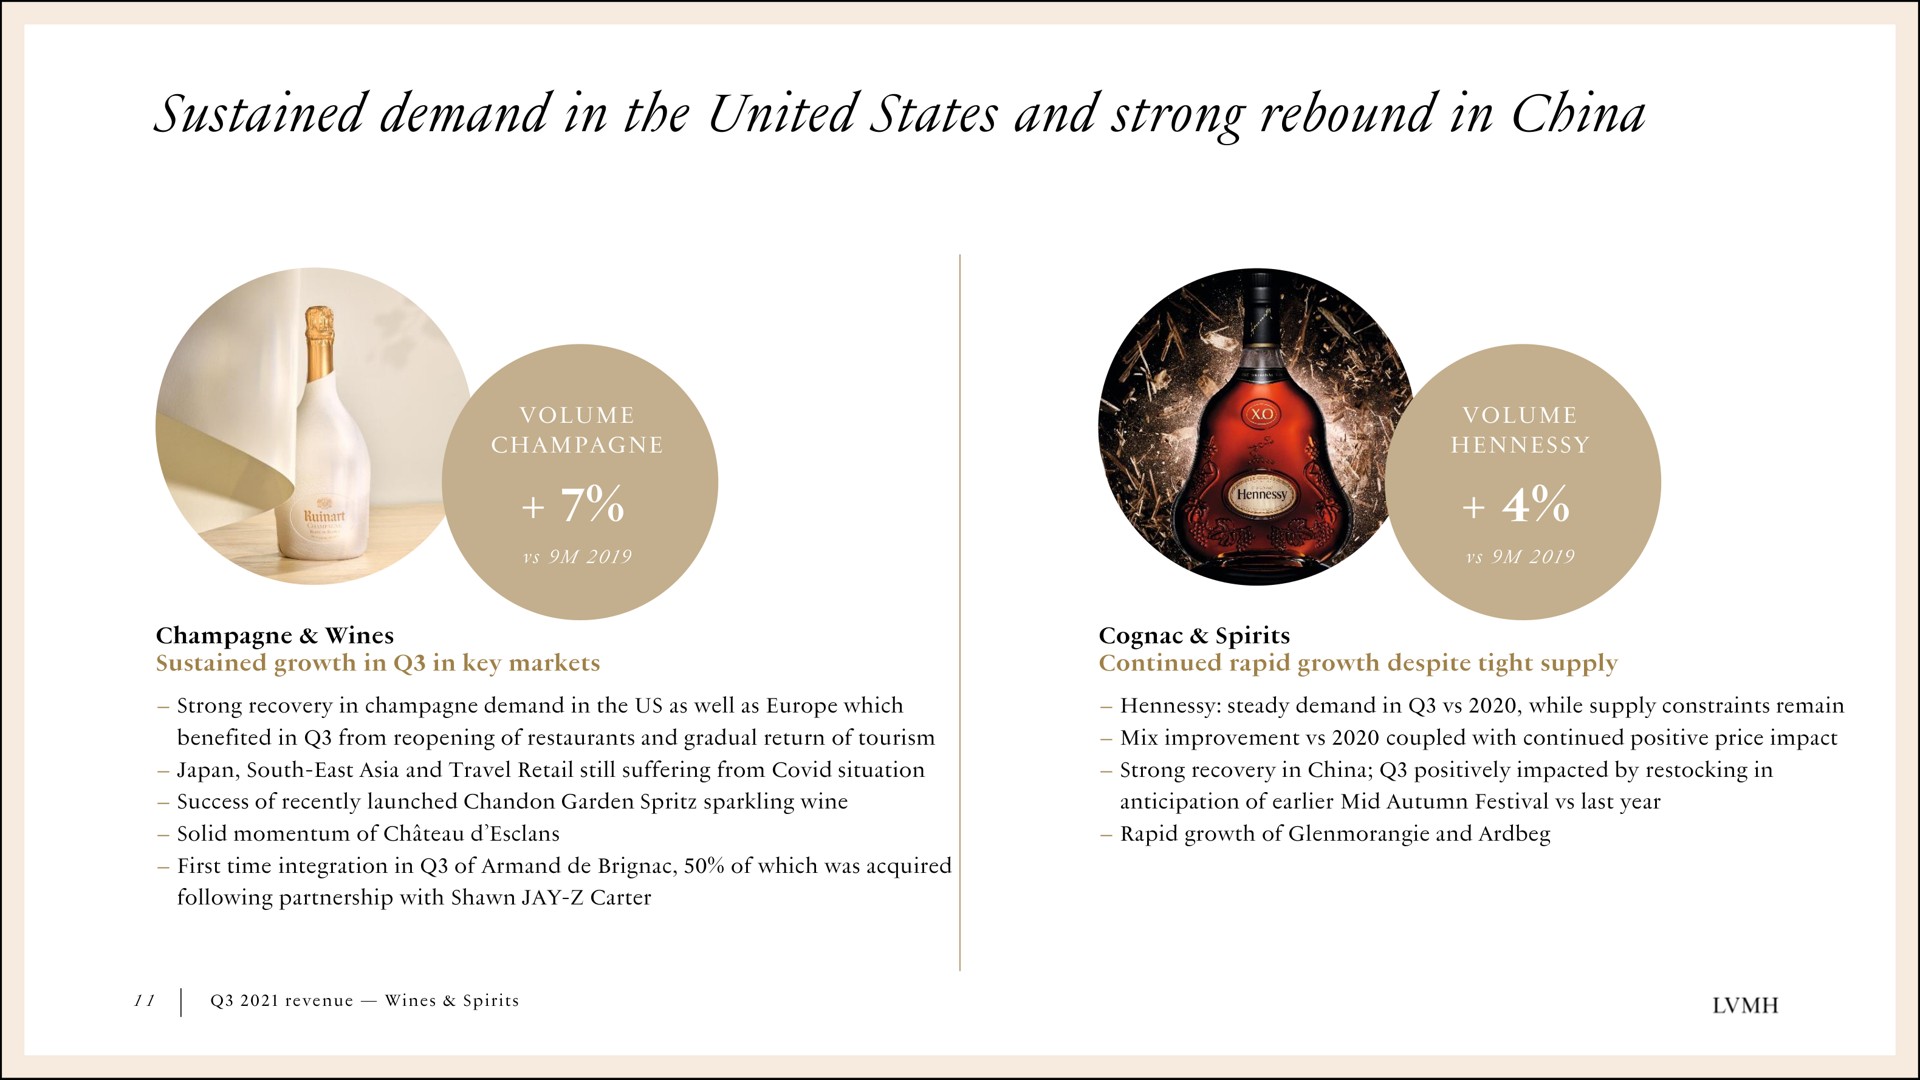 sustained demand in the united states and strong rebound in china | LVMH